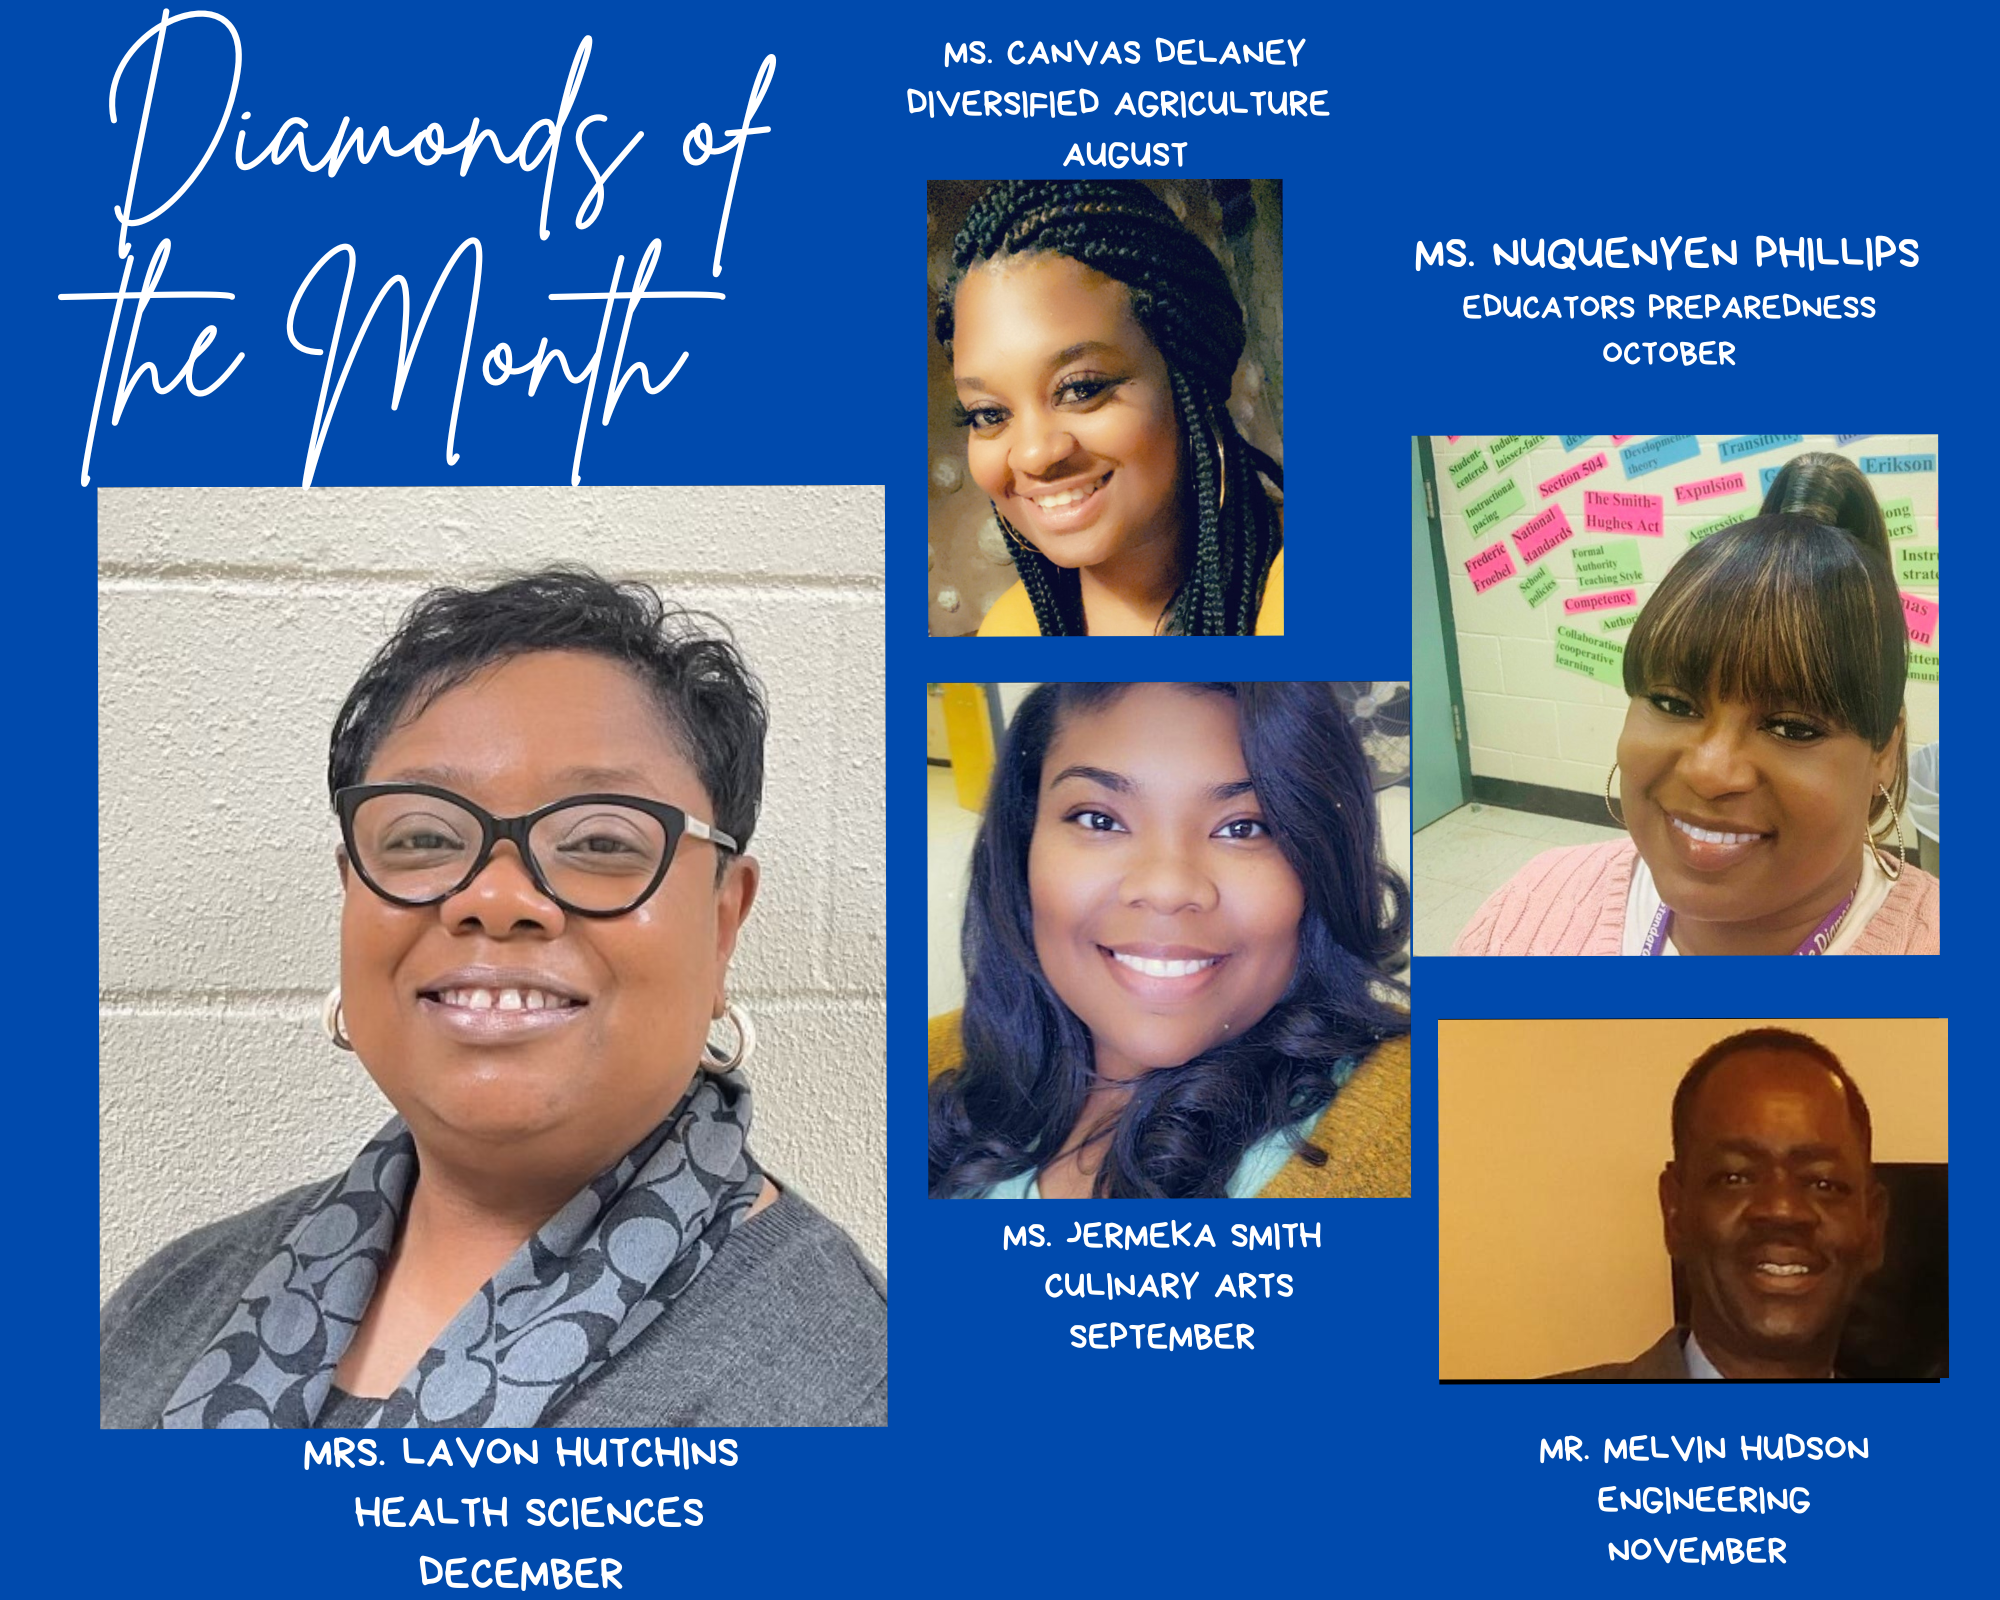 Diamonds of the Month; Mrs. Lavon Hutchins, Health Sciences, December; Ms. Canvas Delaney, Diversified Agriculture, August; Ms. Jermeka Smith, Culinary Arts, September; Ms. NuQuenyen Phillips, October; Mr. Melvin Hudson, Engineering, November